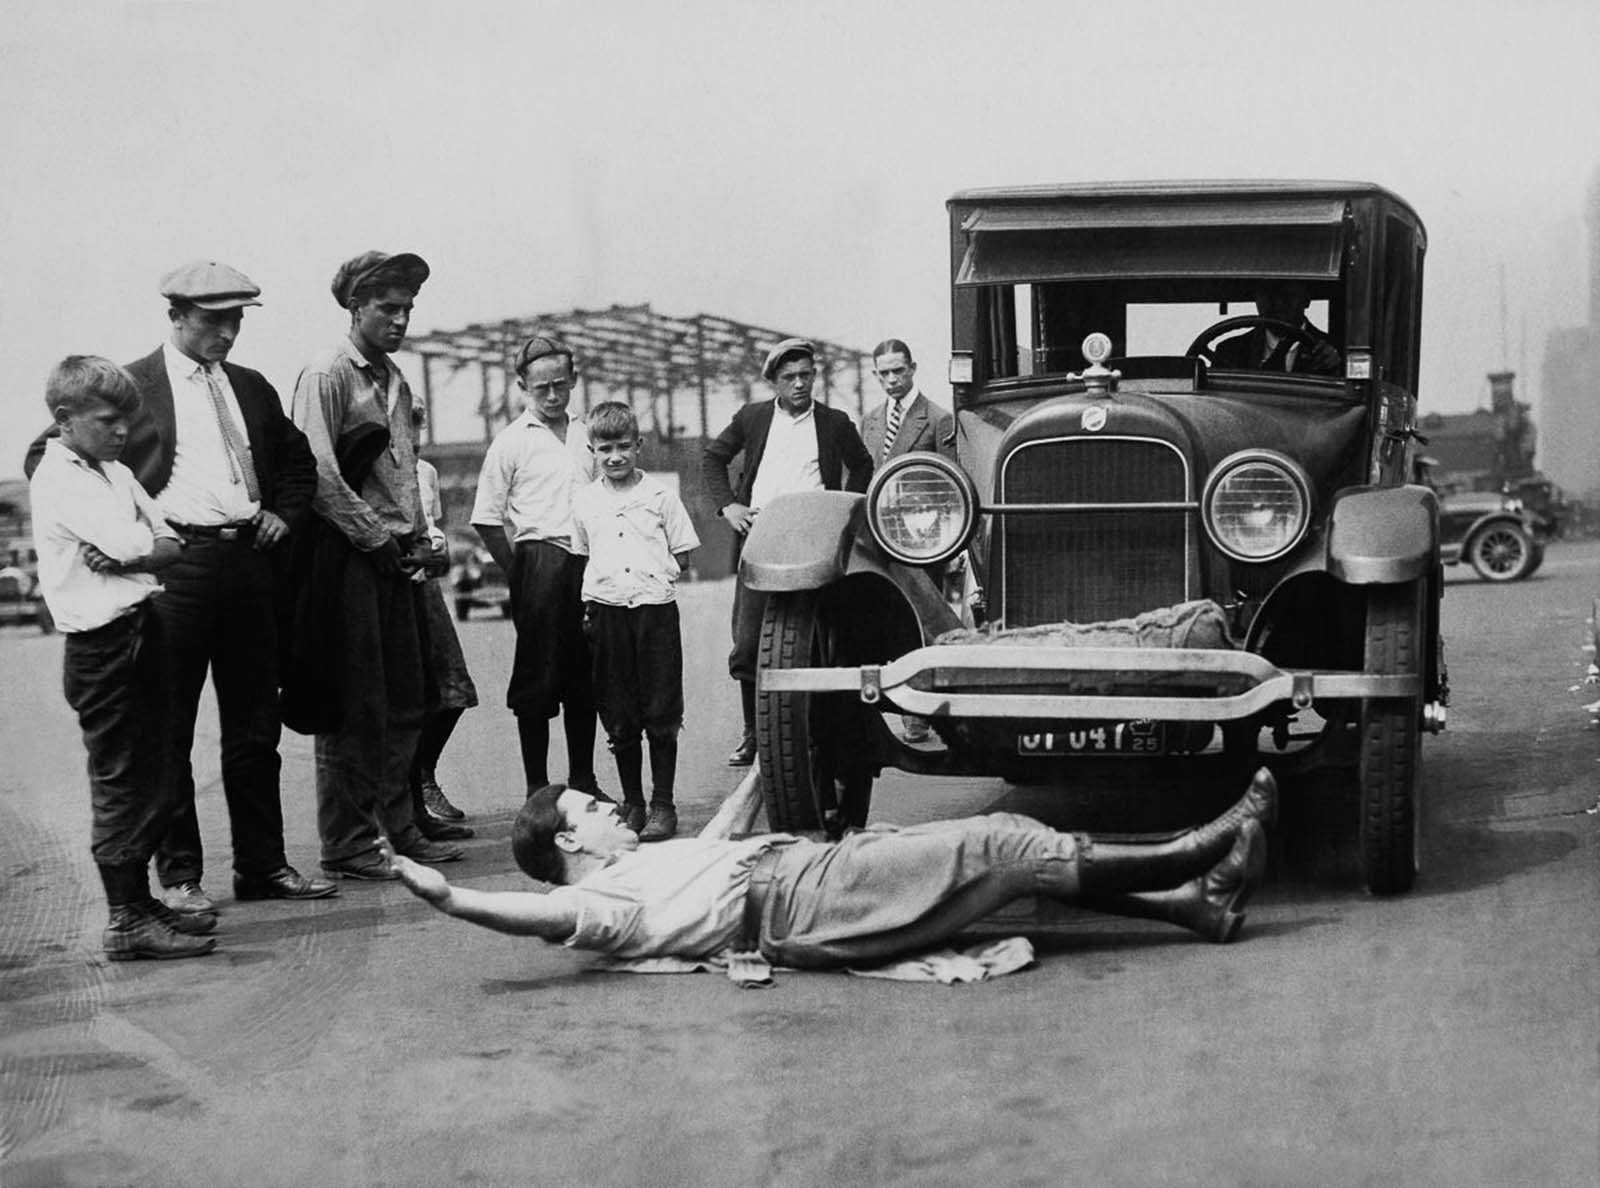 Galen Gotch trains for the Strongman World Championship In New York by being run over by a car, 1920.